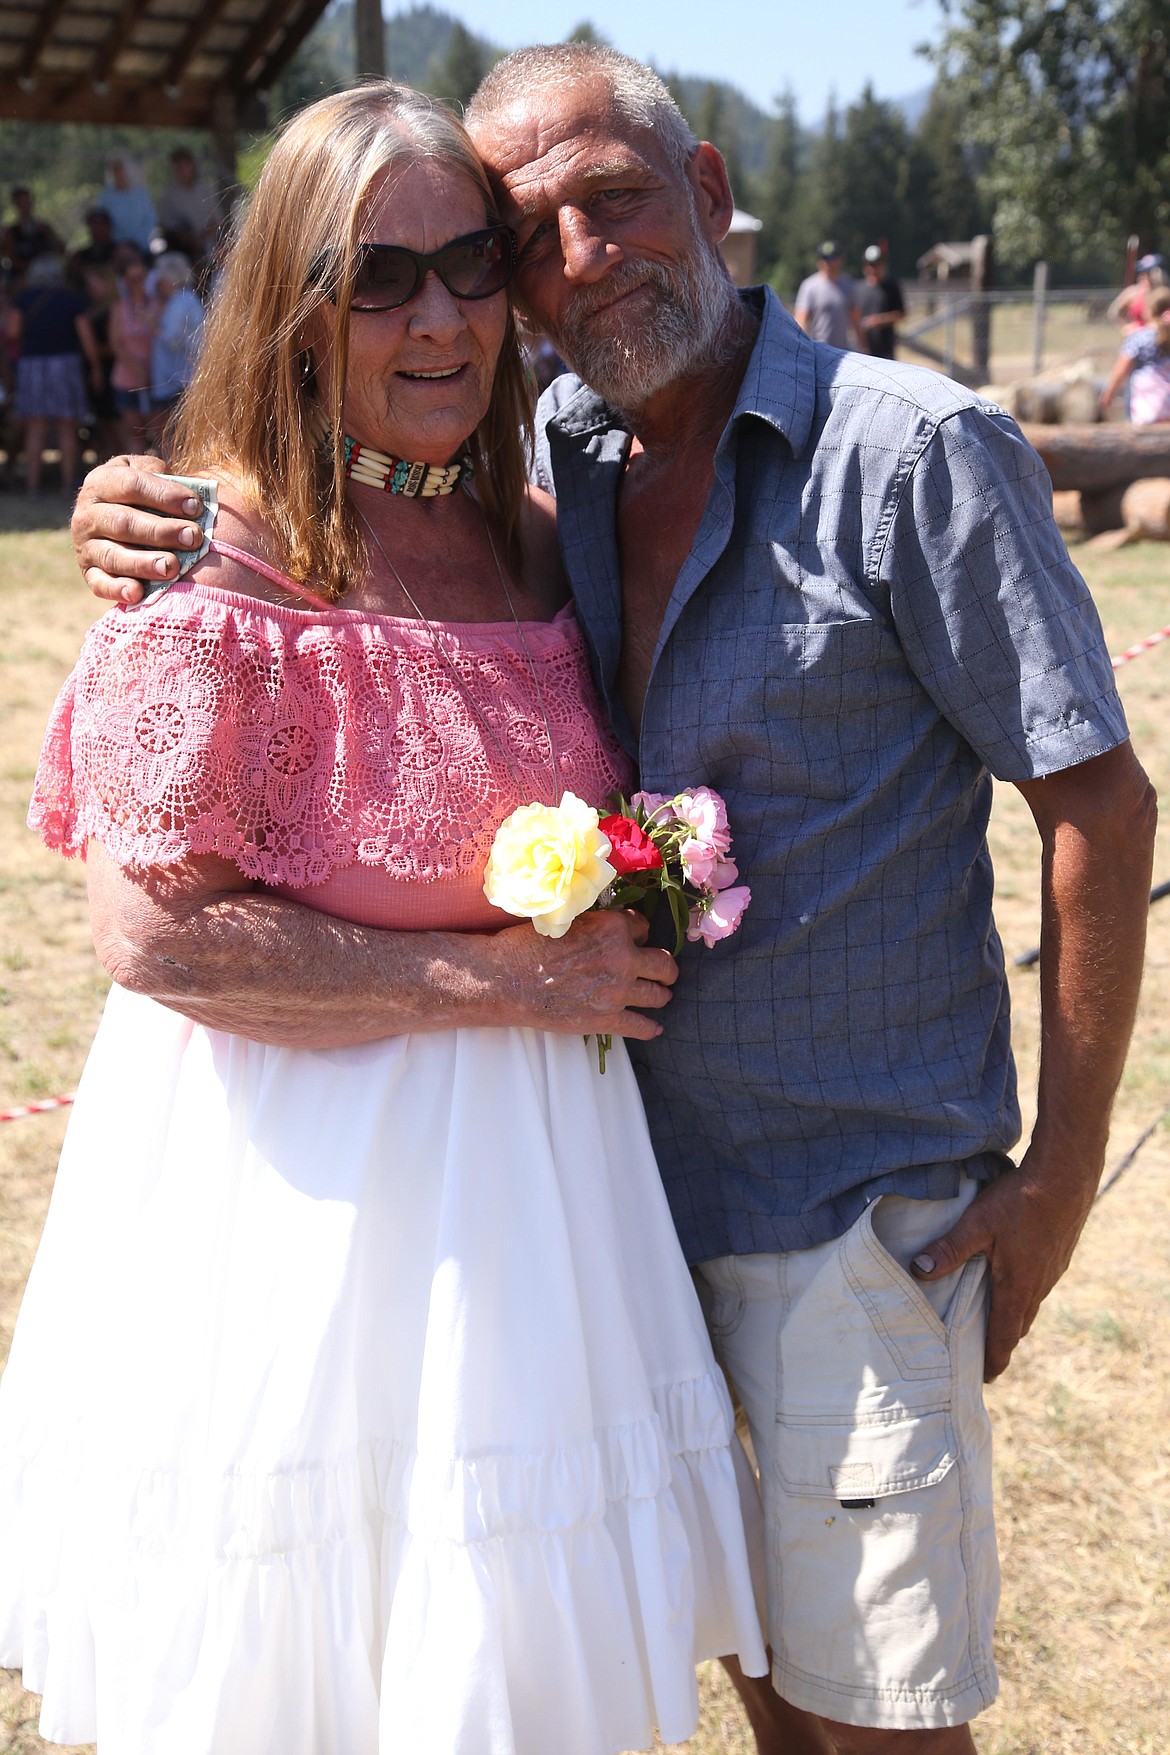 Scott and Clara Dunham got married after the turtle racing competition at the Old Fashioned Fourth of July celebration in Clark Fork on Sunday in front of the fully packed bleachers at the ballfield.